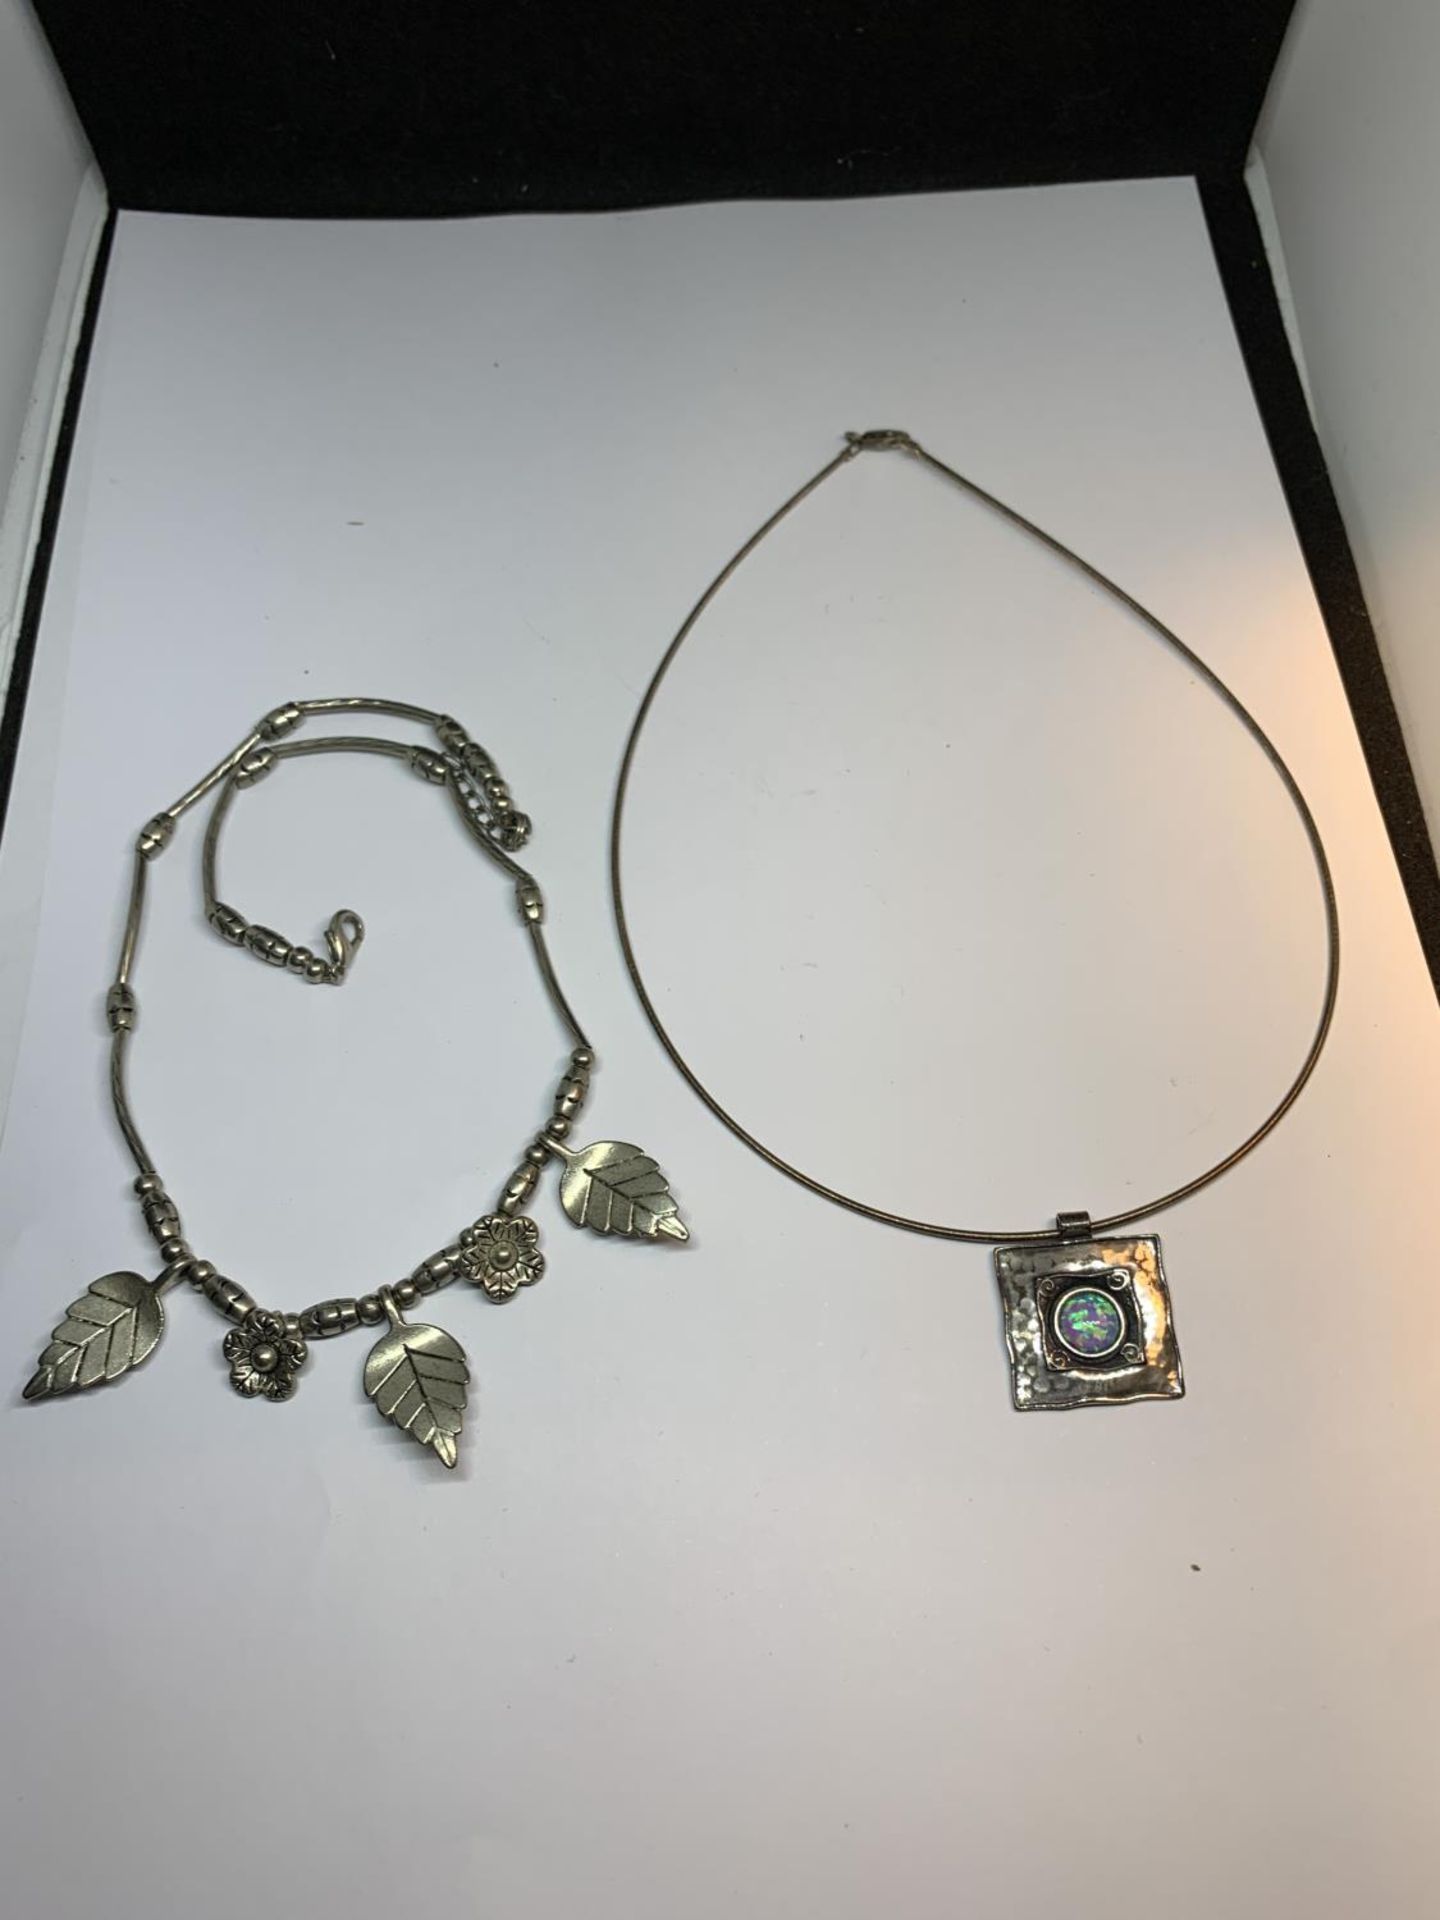 TWO SILVER NECKLACES ONE WITH LEAVES AND FLOWERS AND ONE WITH A PENDANT